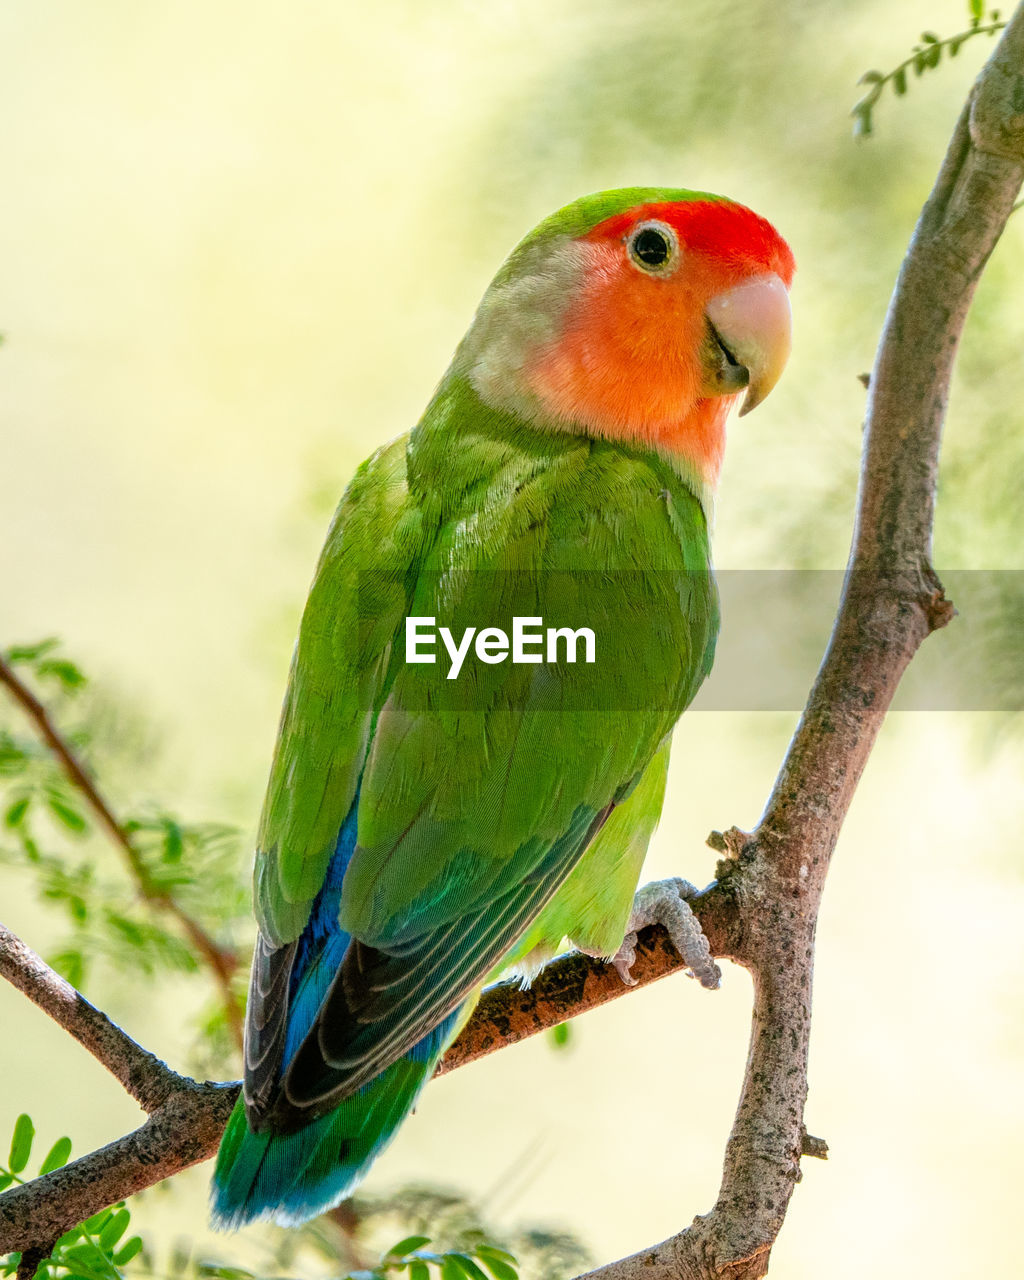 Nice plum-crowned parrot on a branch